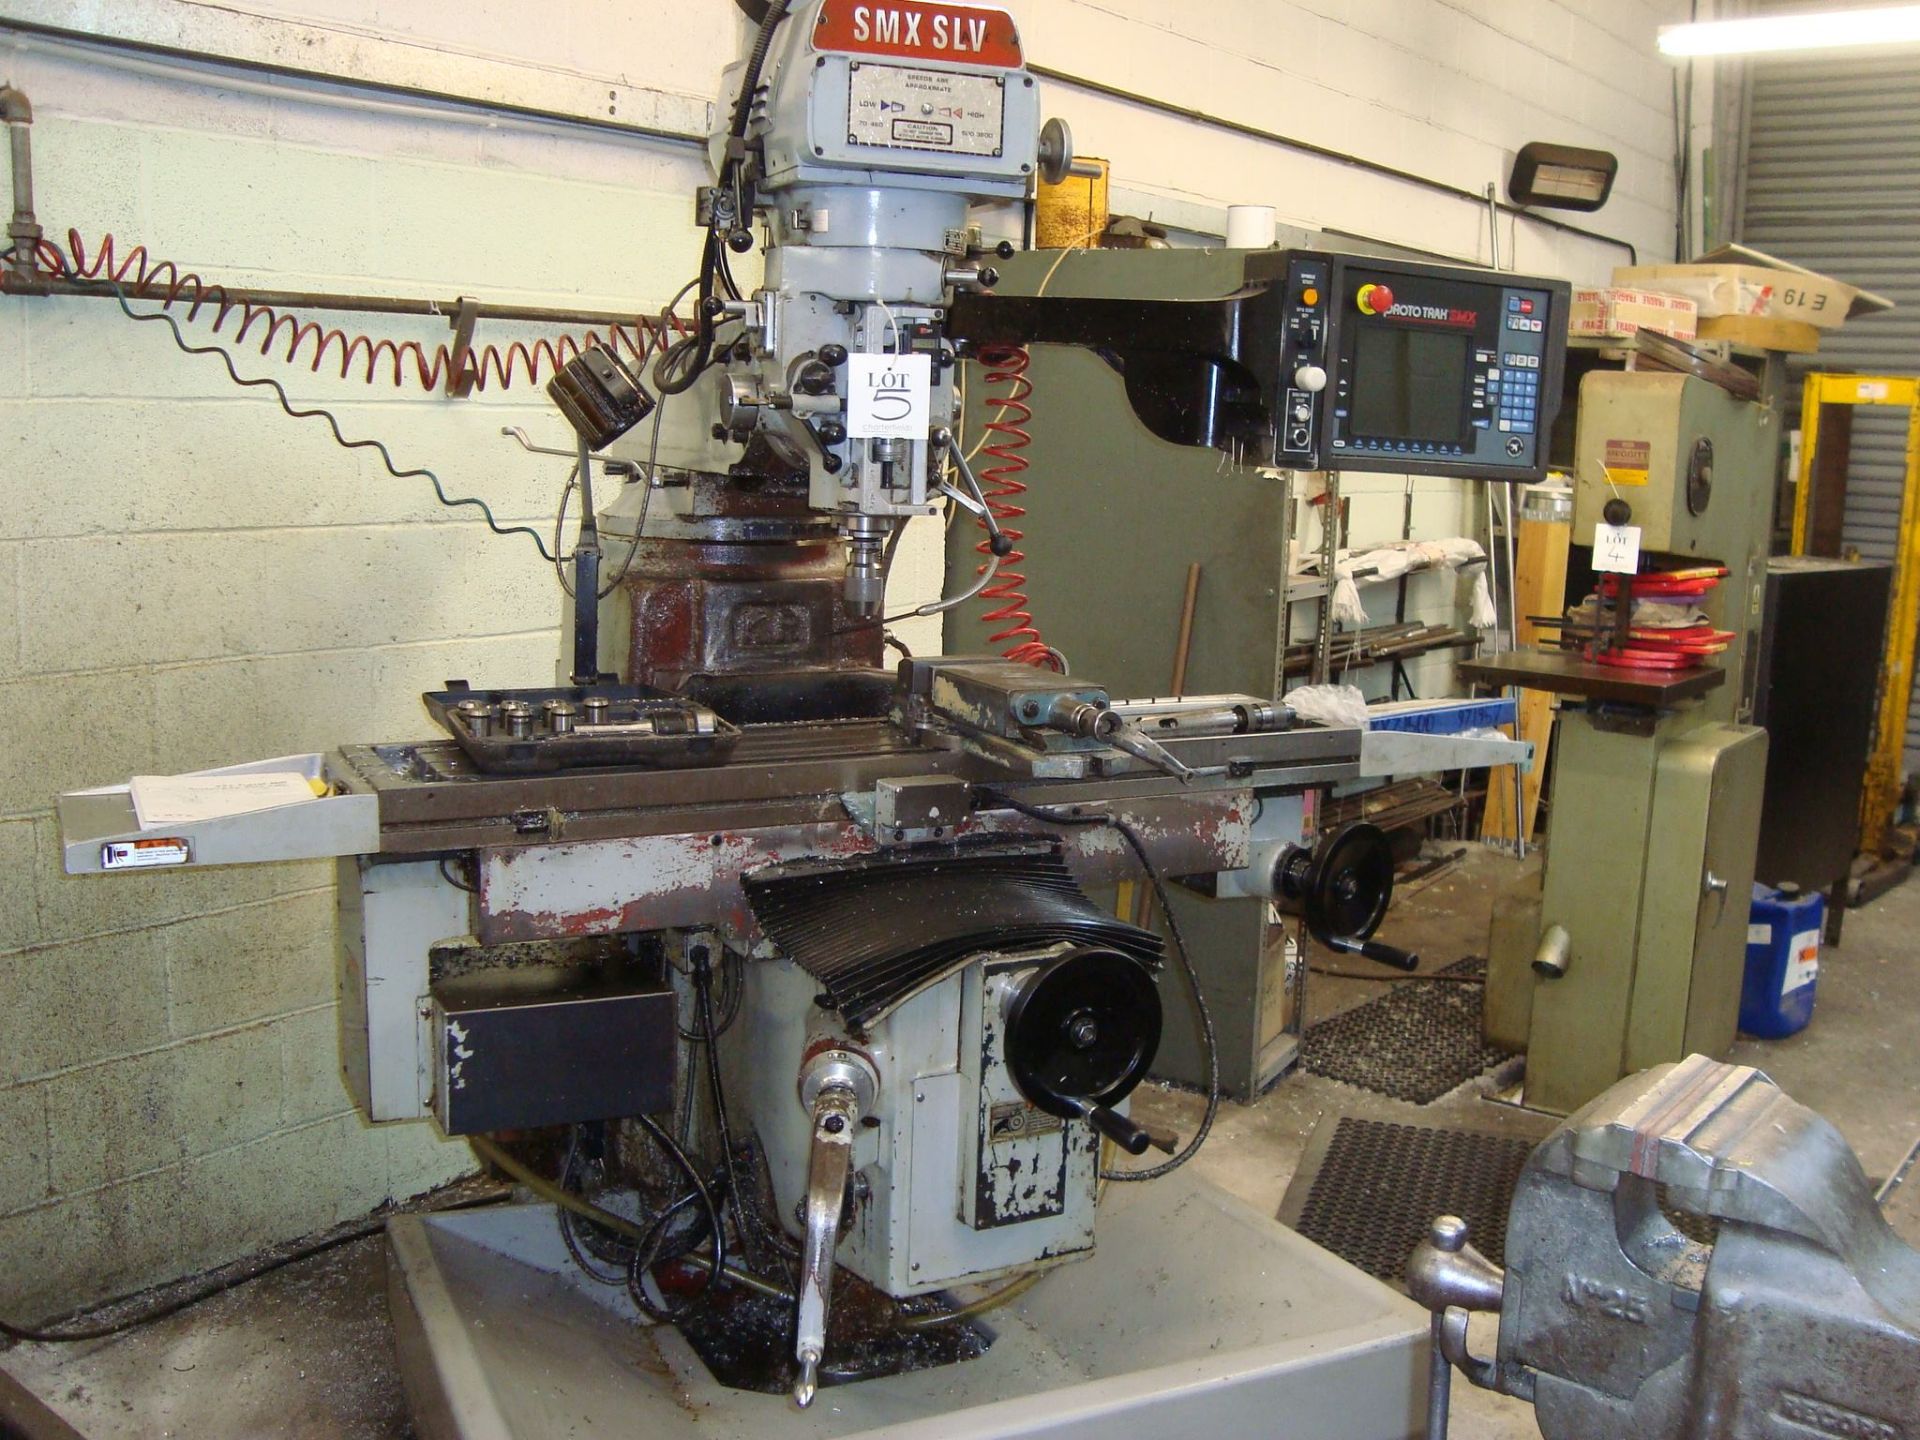 An XYZ SMX SLV vertical milling machine Serial number 10817 with ProtoTrak SMX control system,